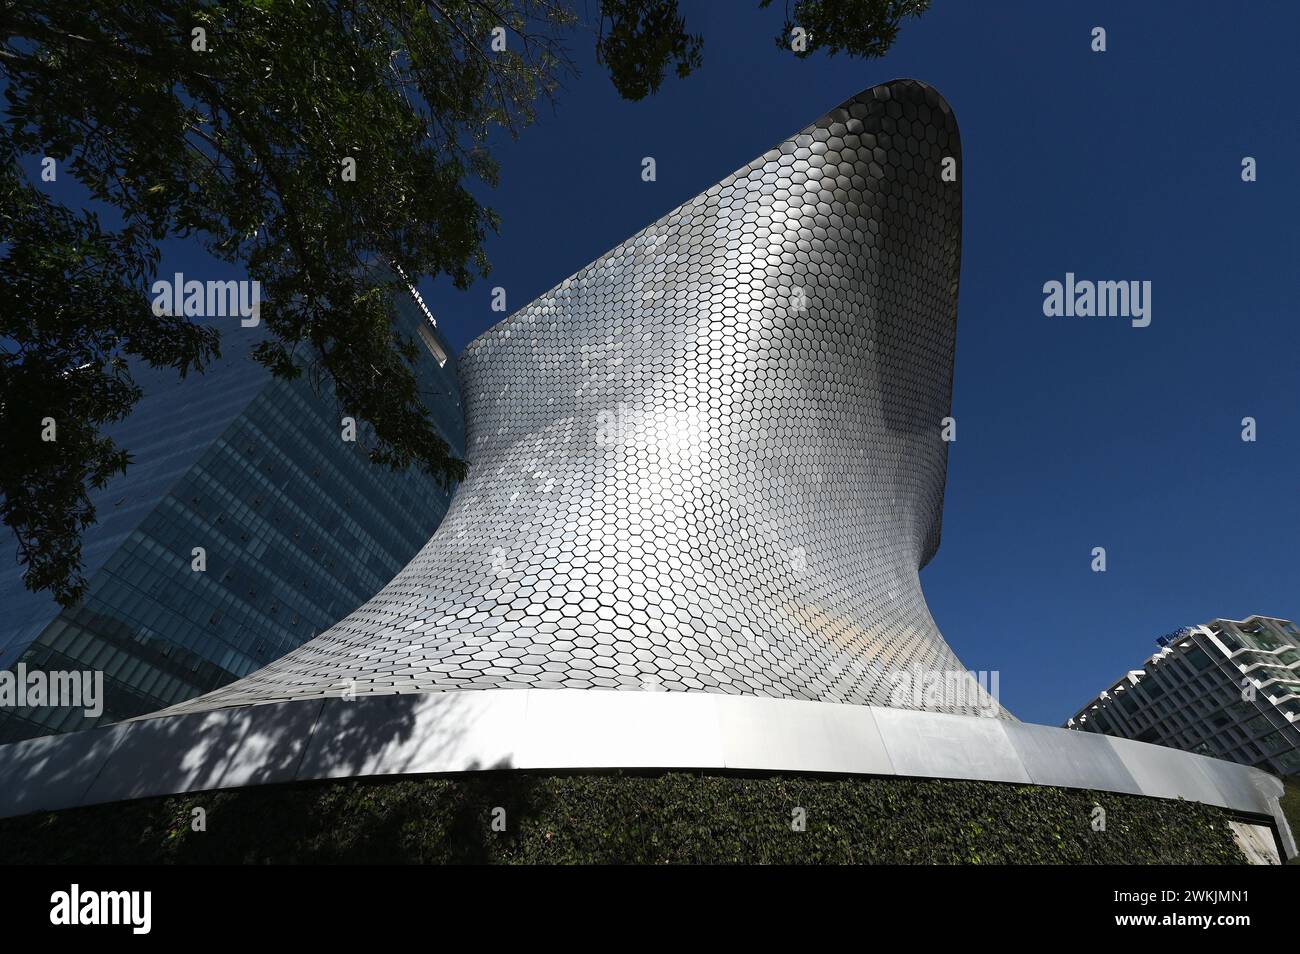 The Museo Soumaya art museum built by billionaire Calos Slim in the Polanco district of Mexico City Stock Photo